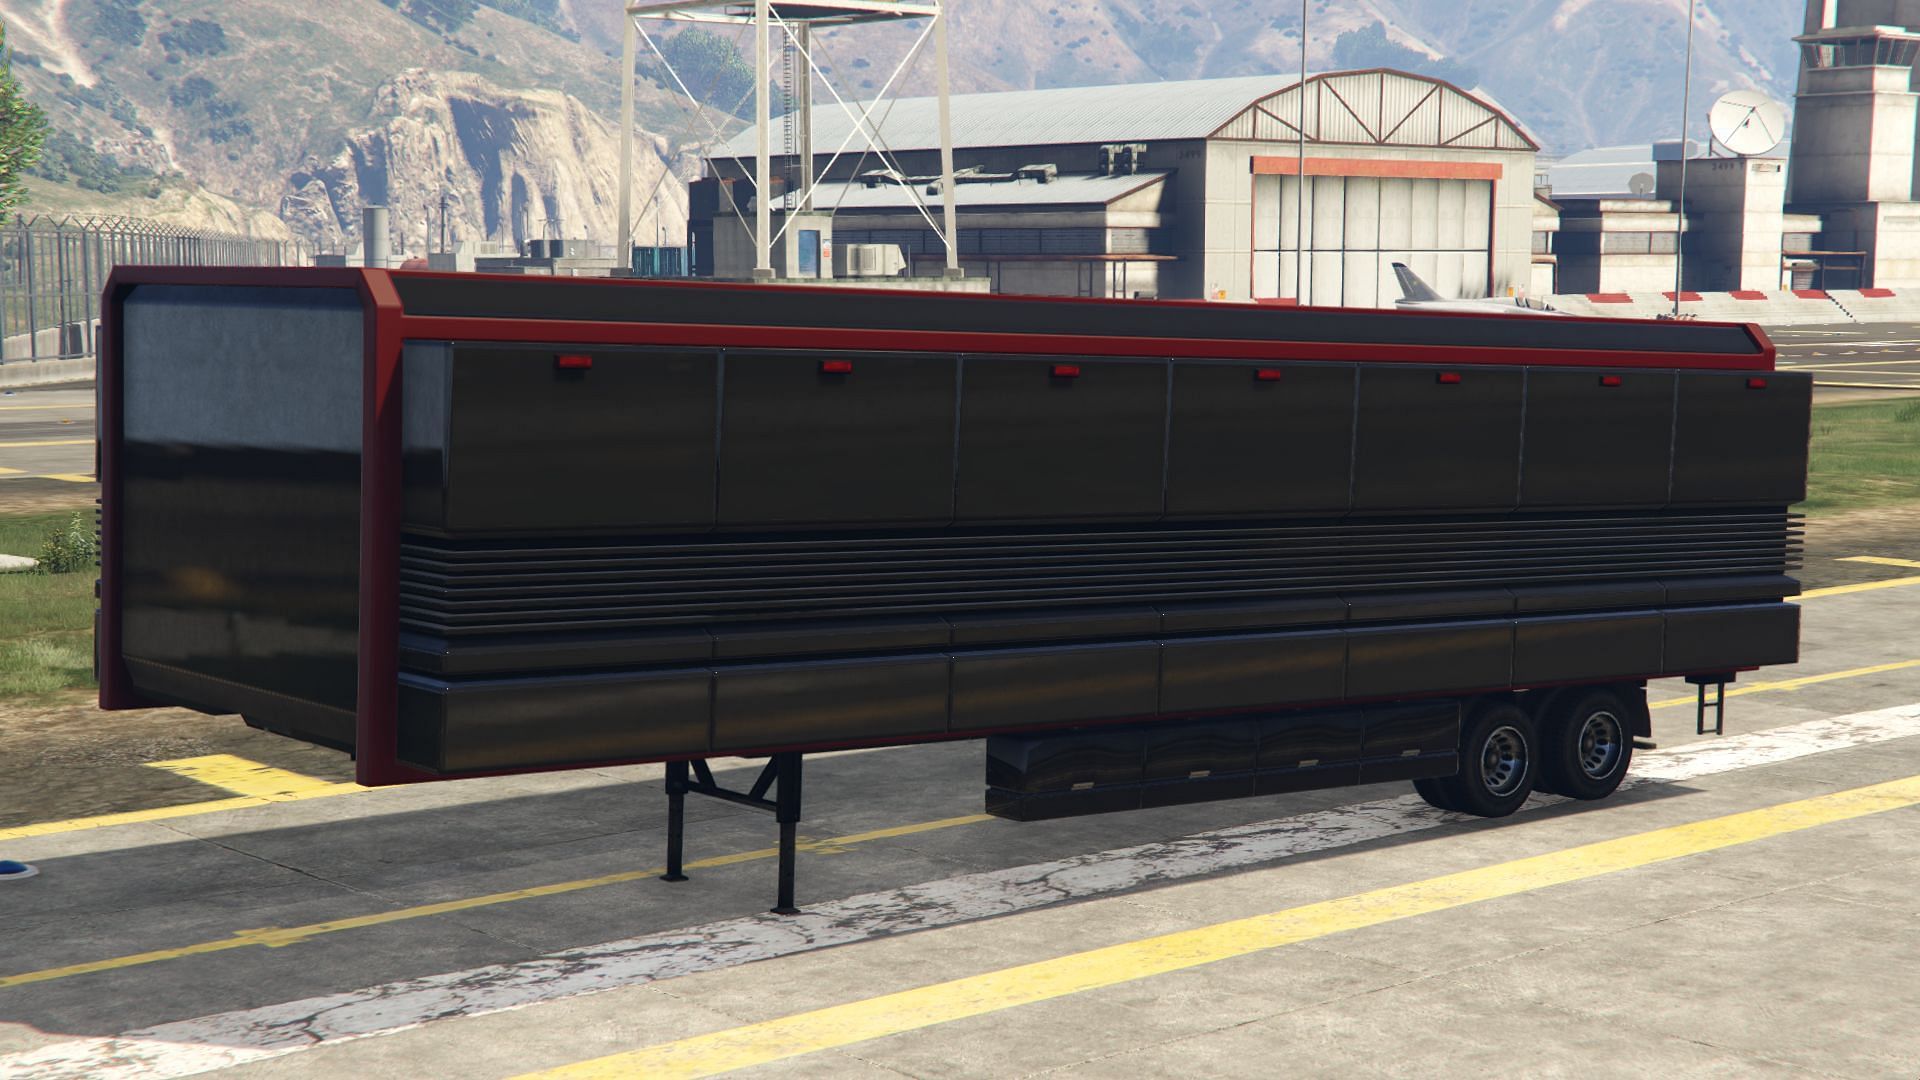 The MOC is the trailer (Image via Rockstar Games)